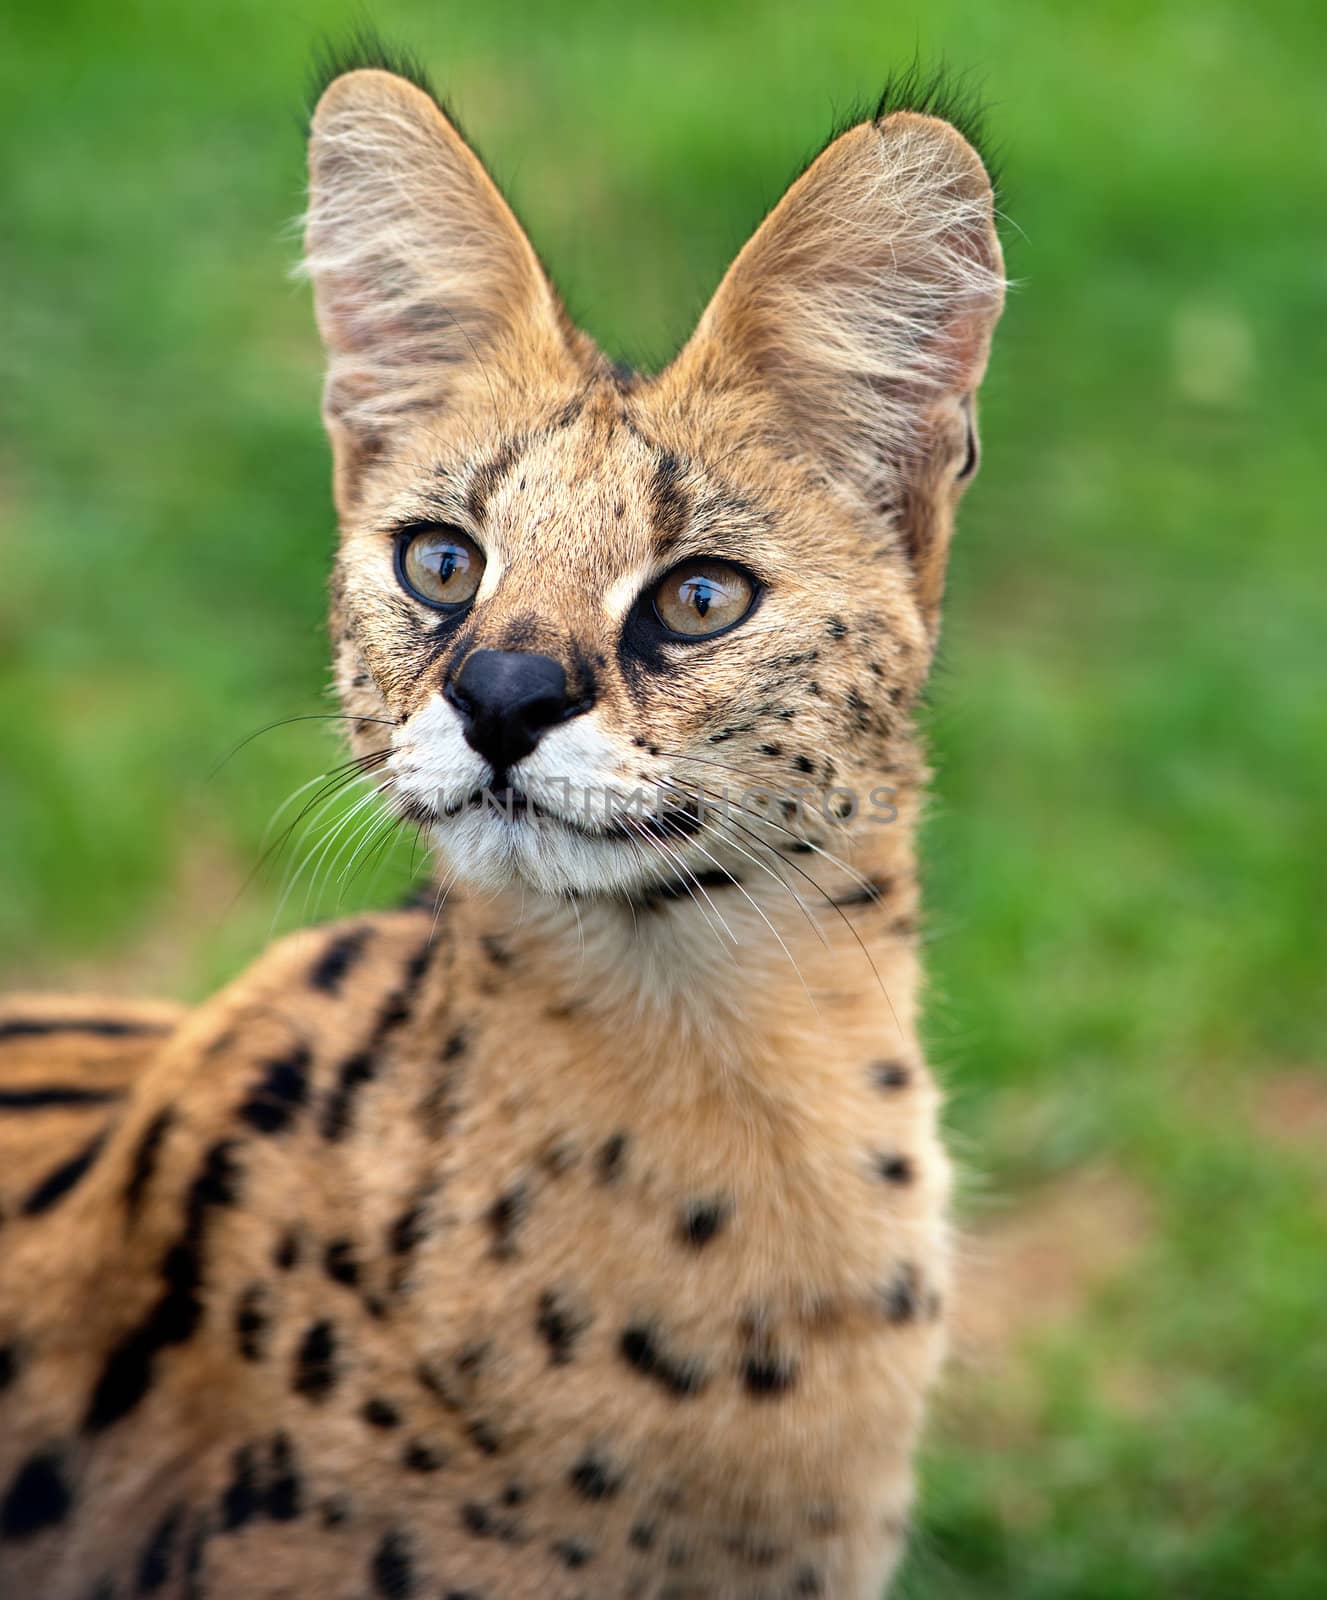 A serval cat focuses attentively with its eyes and ears.